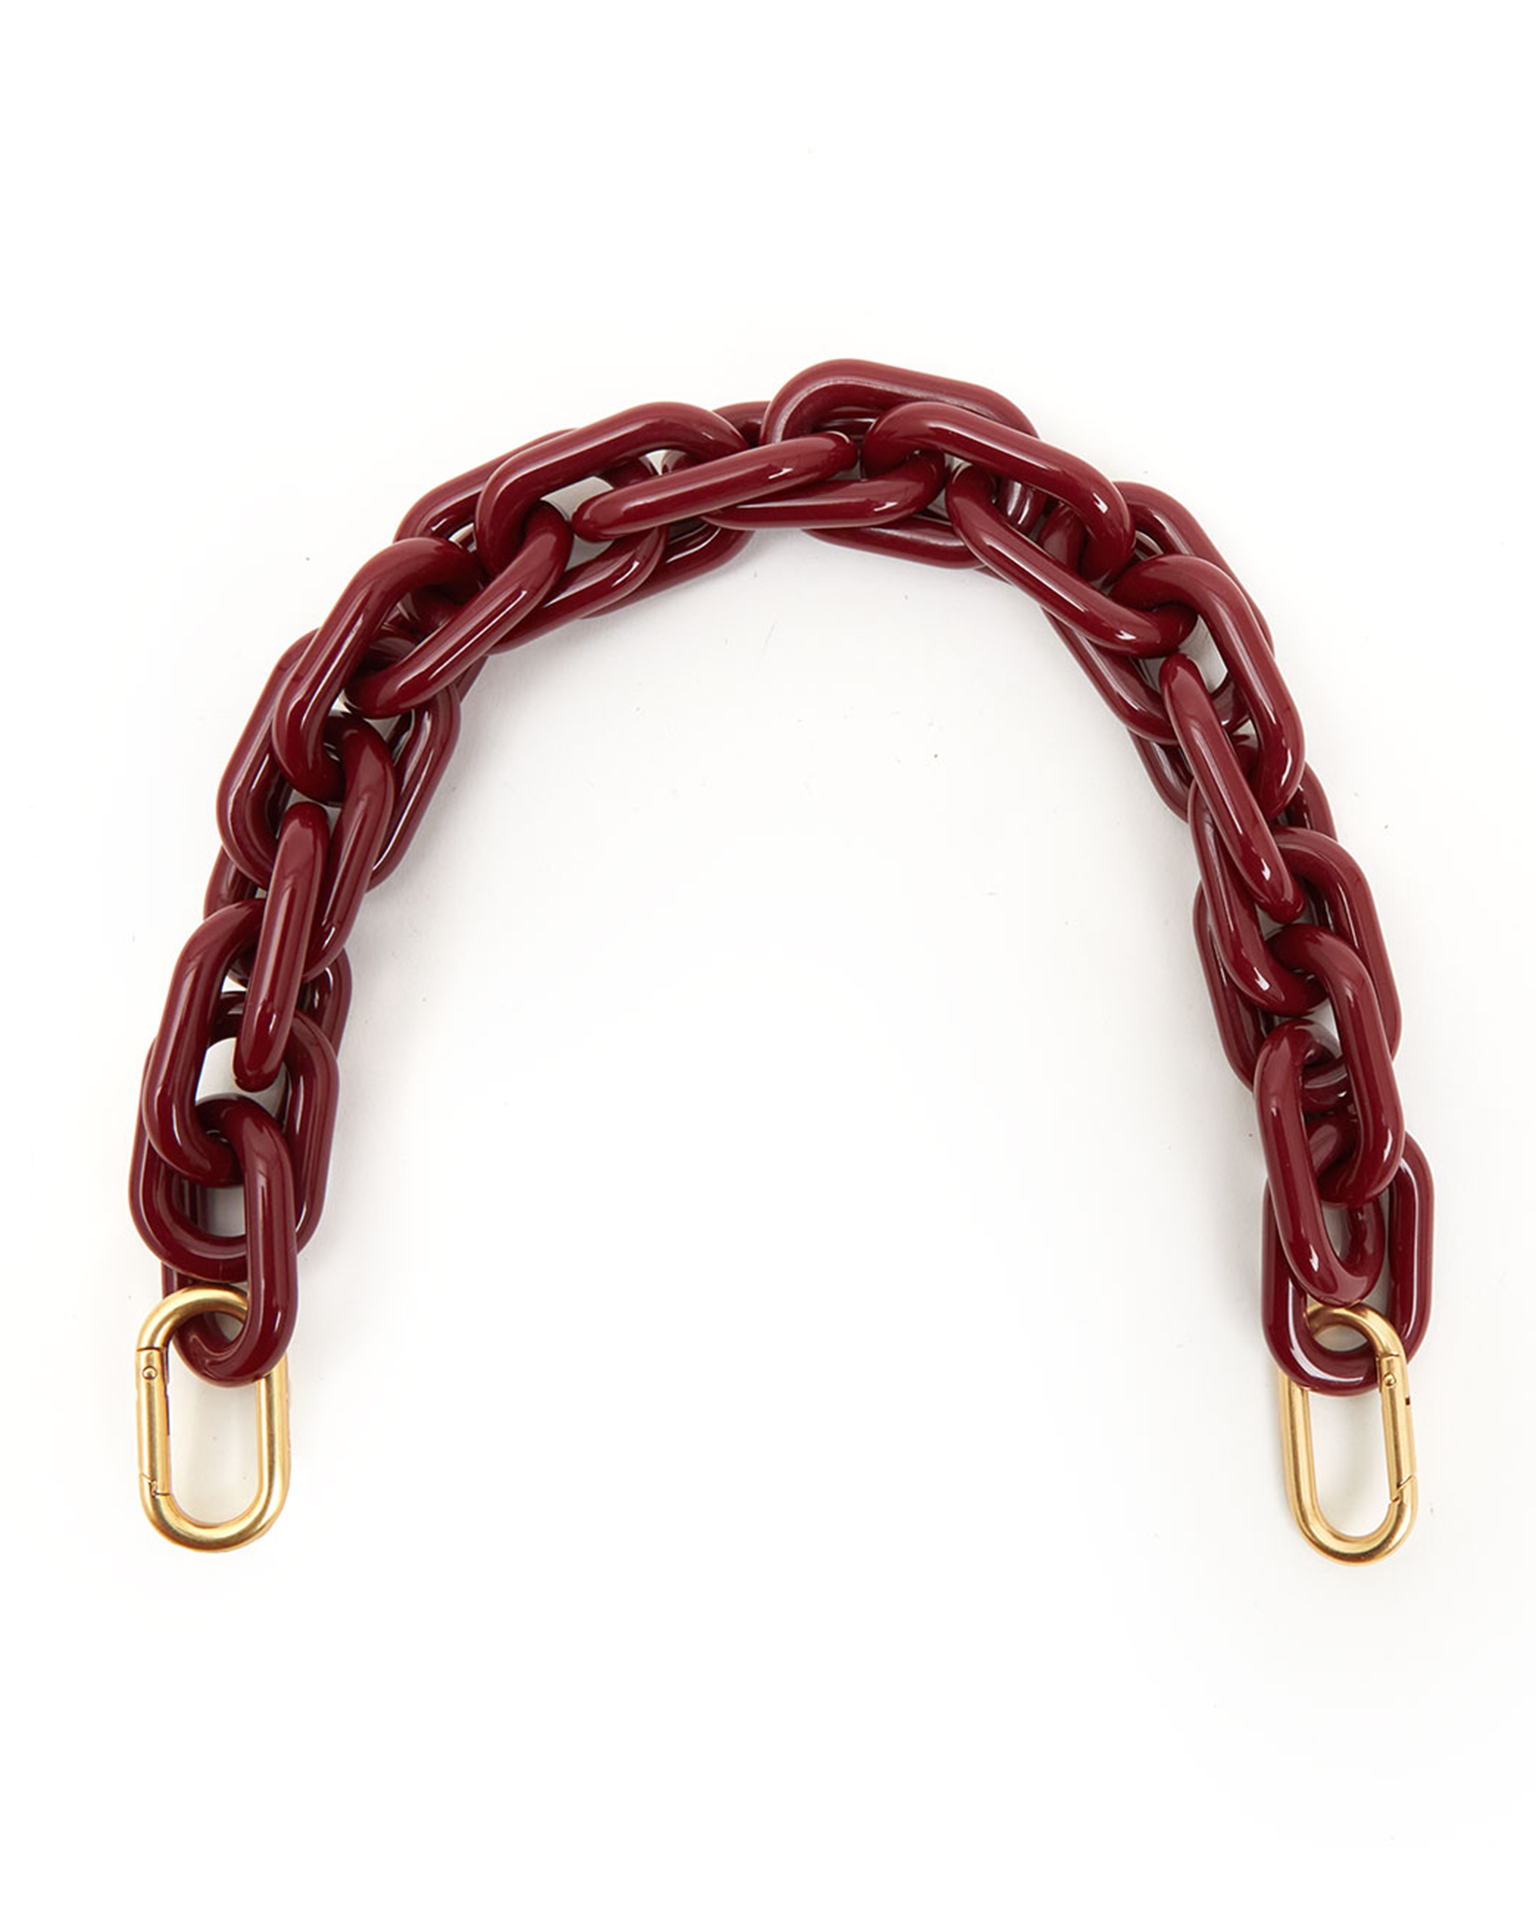 Clare V. Shortie Strap in Oxblood Resin - Bliss Boutiques